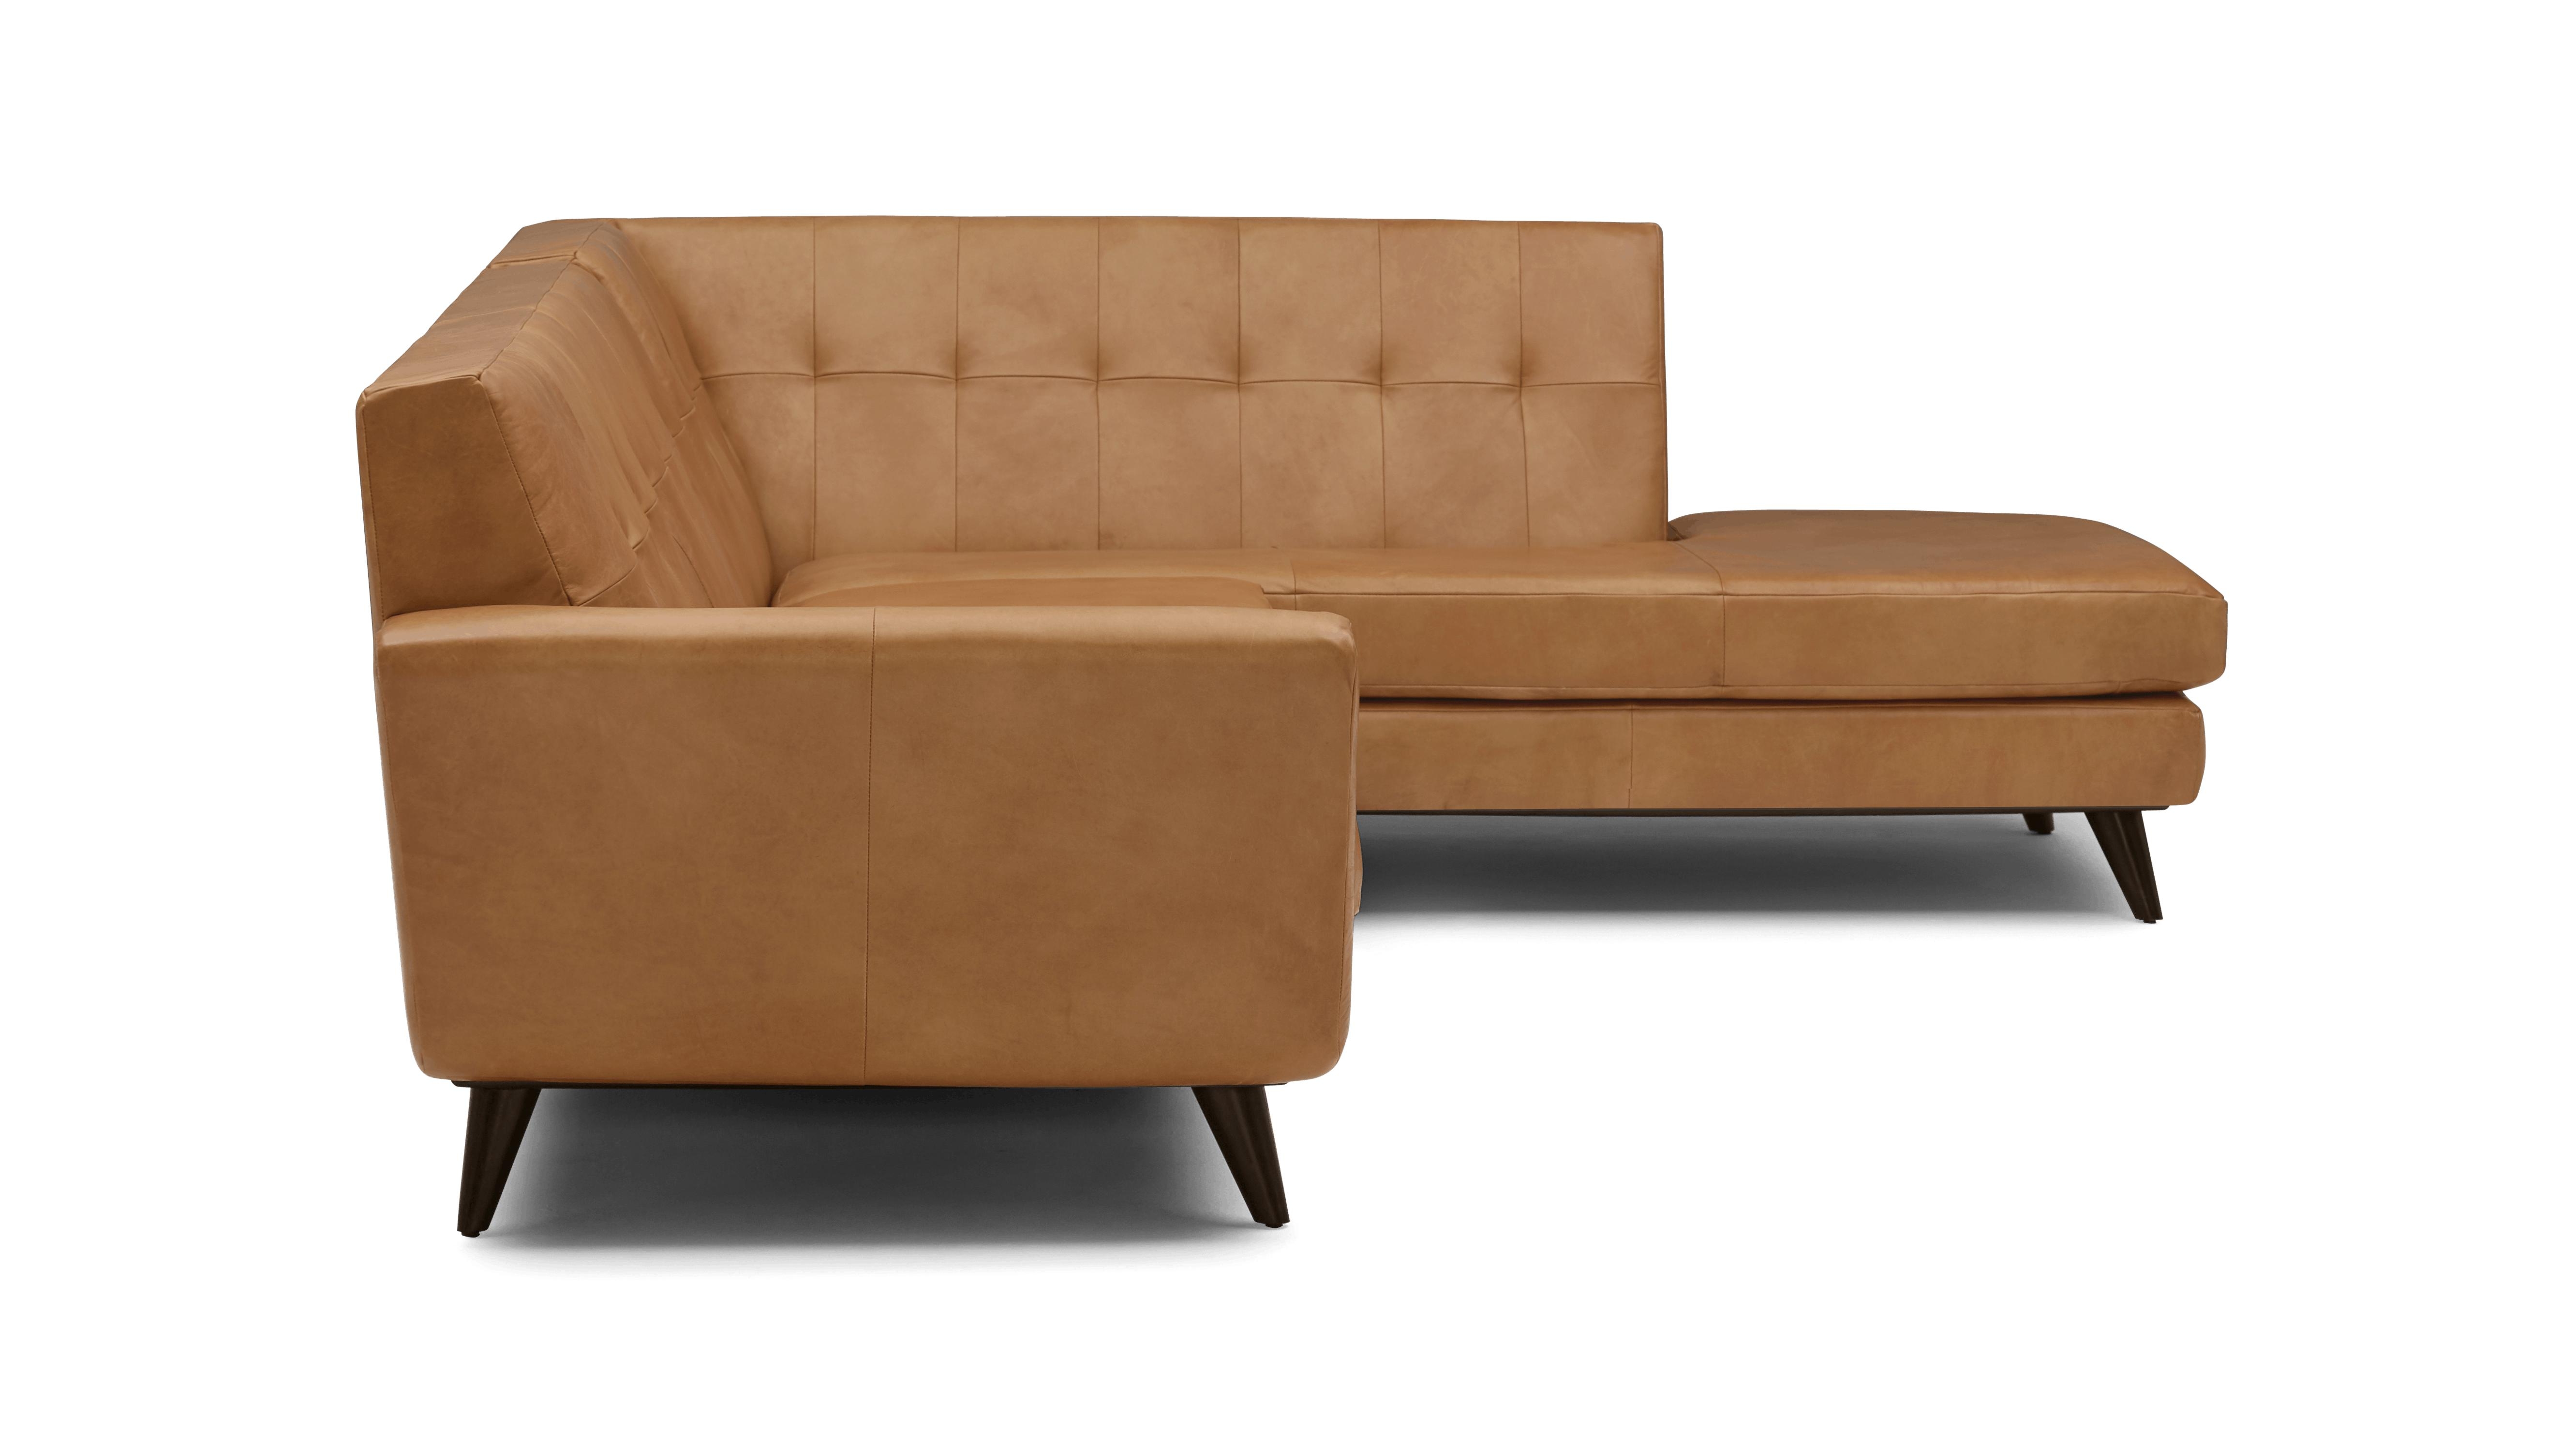 Brown Hughes Mid Century Modern Leather Sectional with Bumper (2 piece) - Santiago Camel - Mocha - Left - Image 2